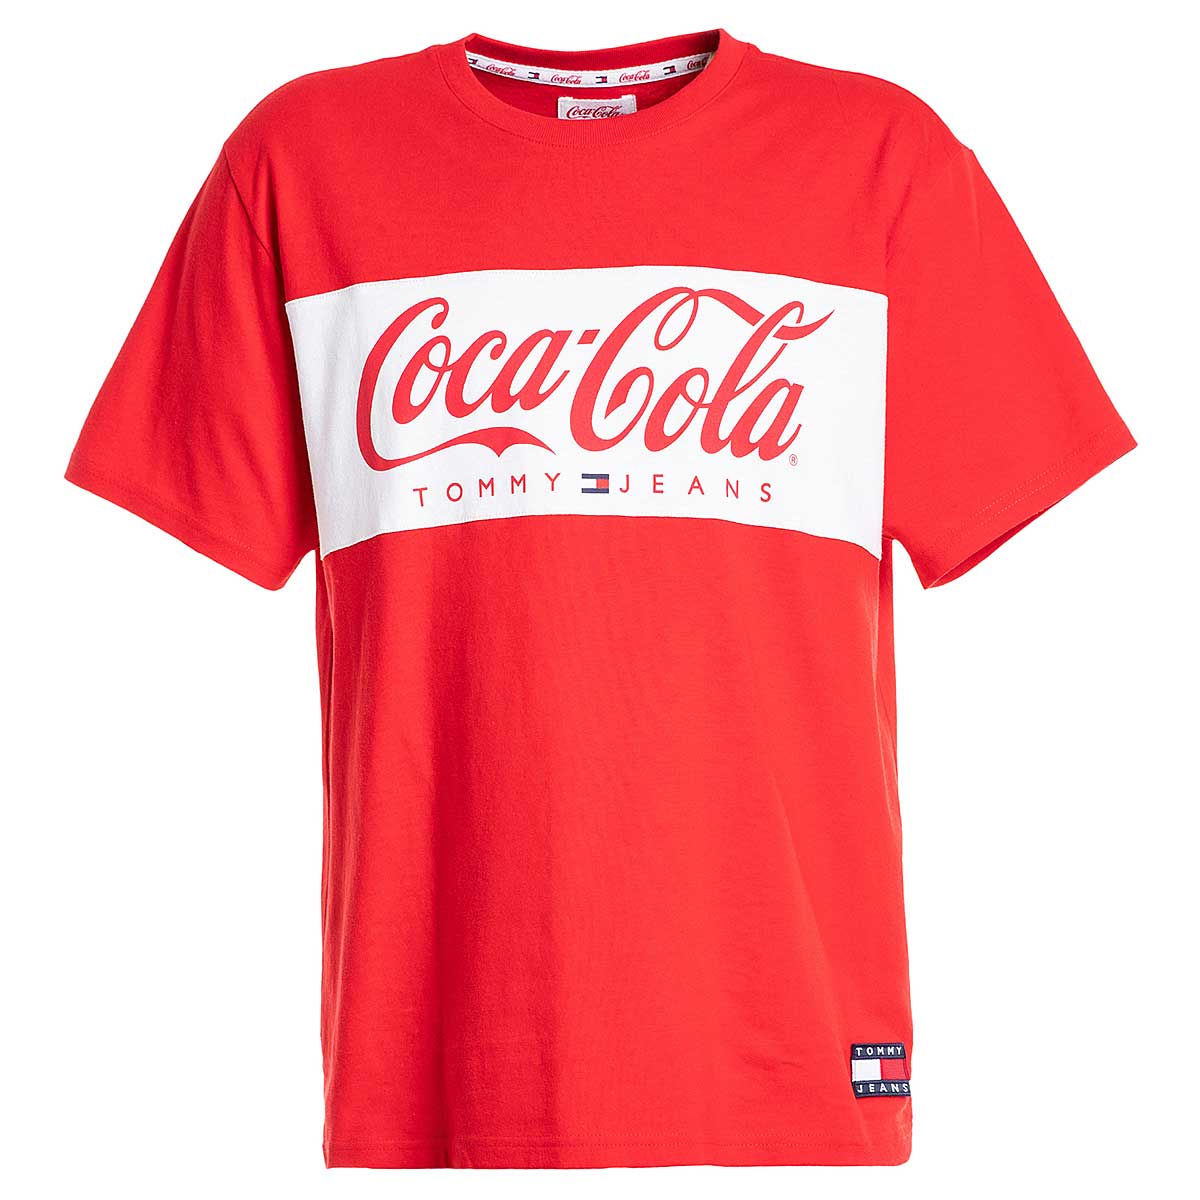 Mail Exchangeable Oops Buy x COCA-COLA T-SHIRT for N/A 0.0 on KICKZ.com!